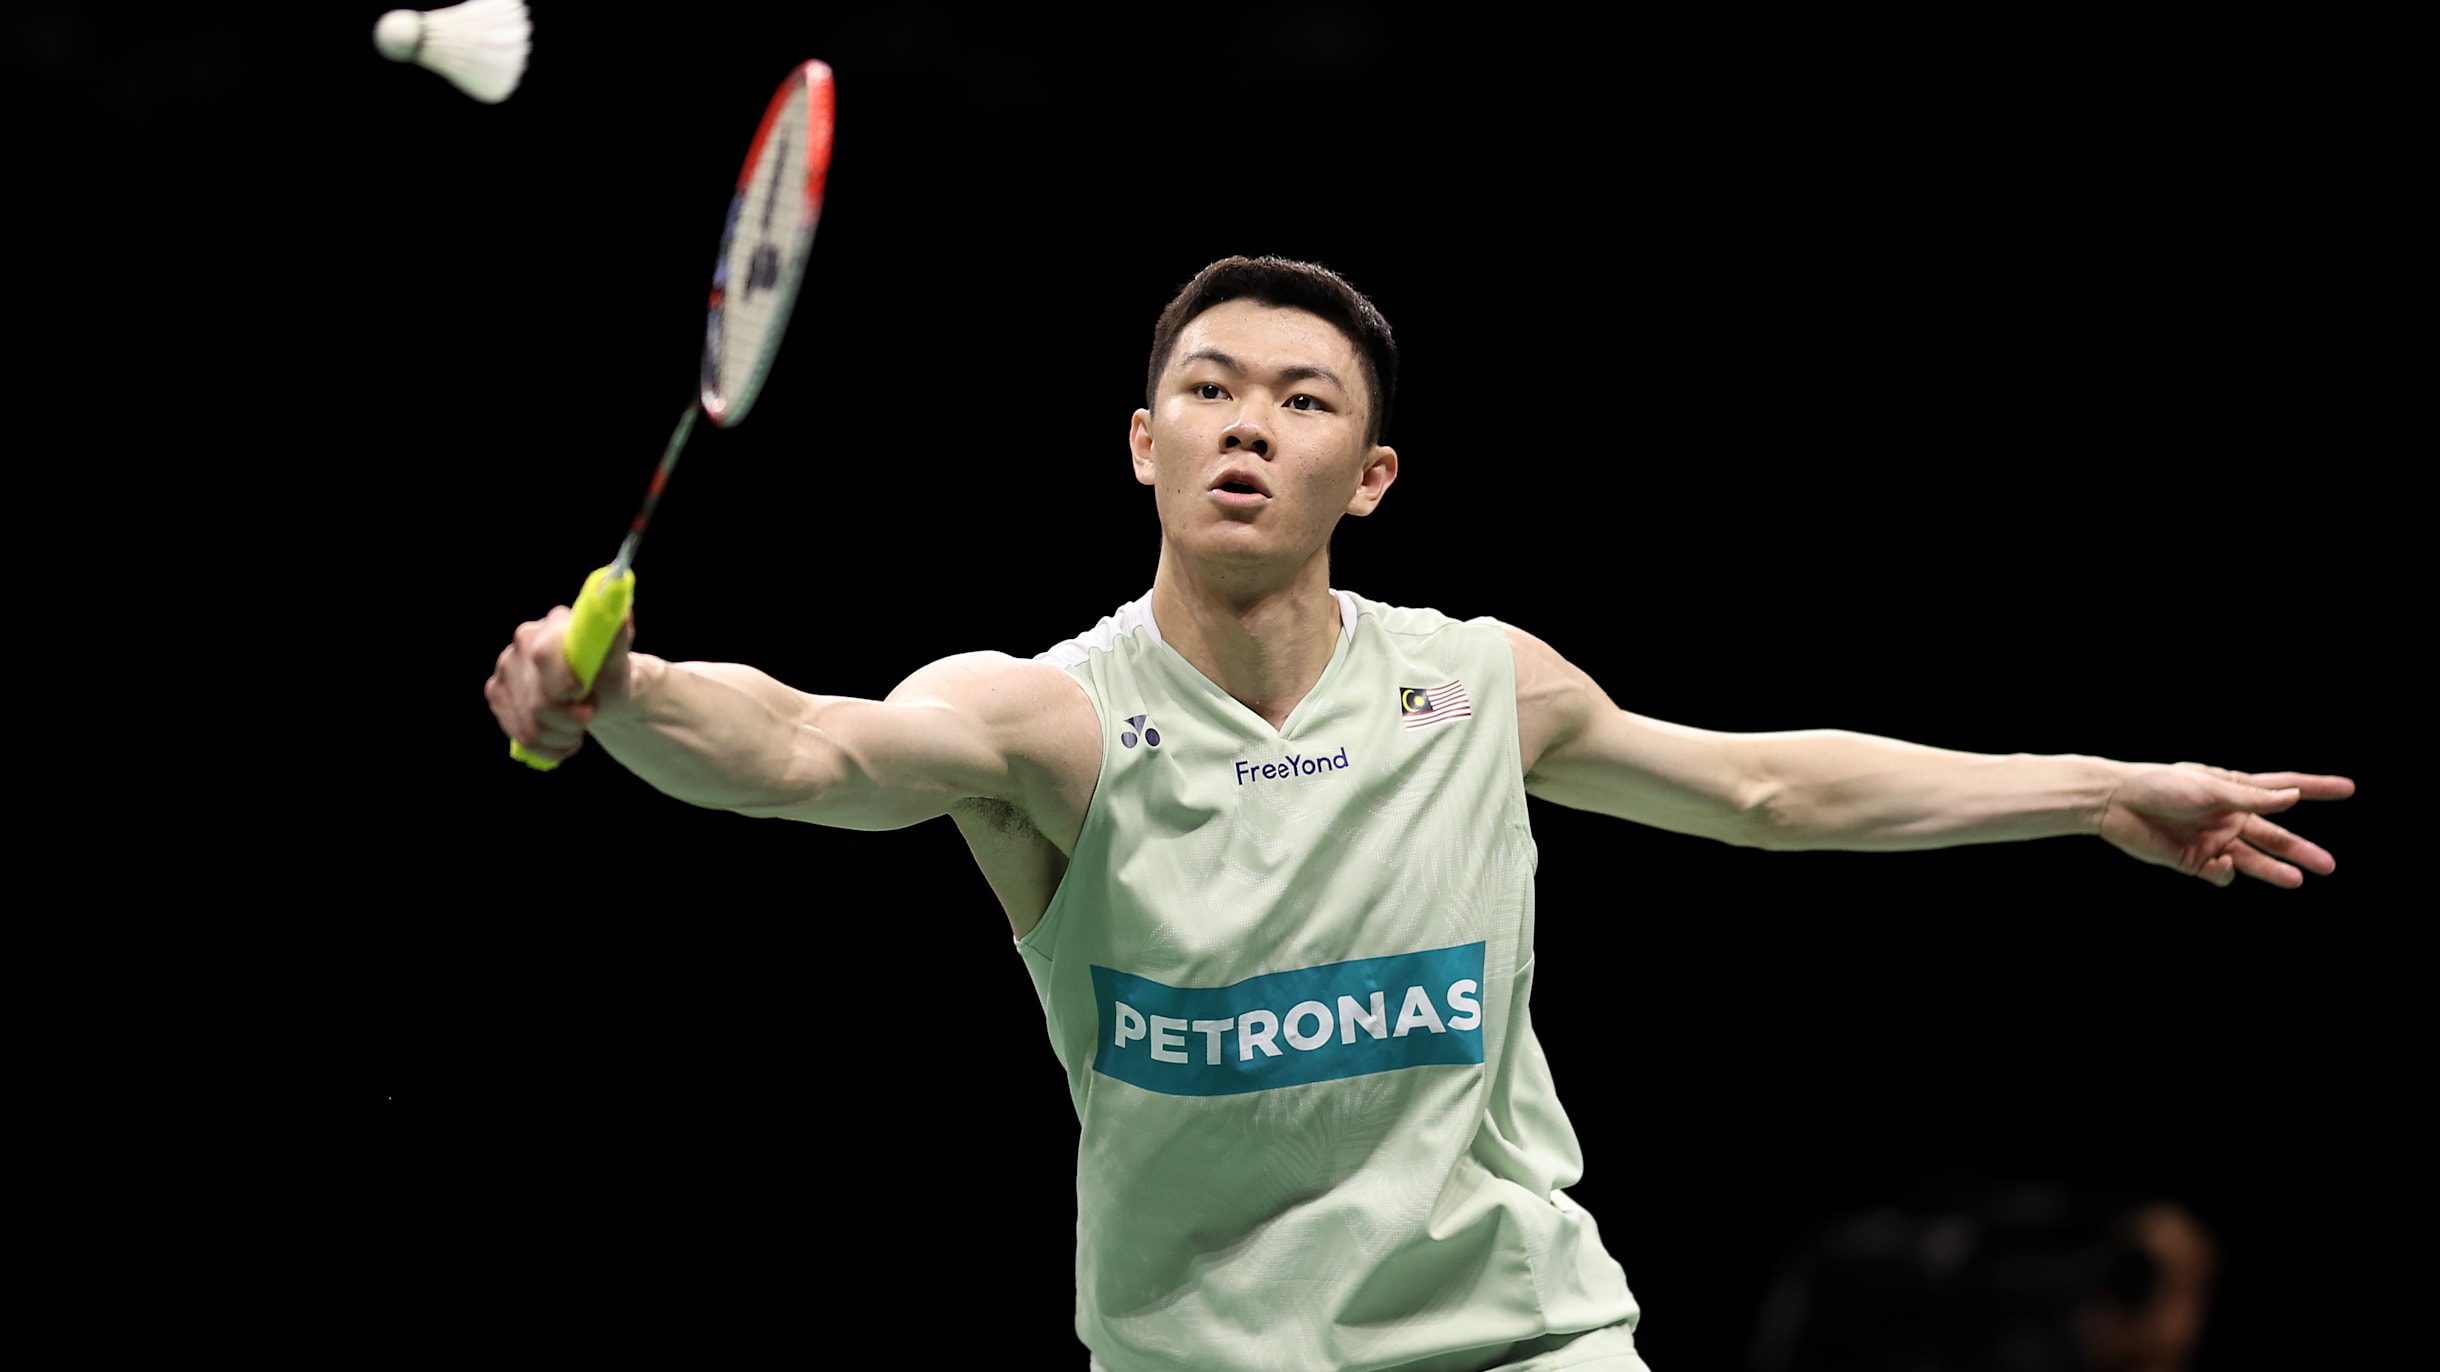 astro badminton live streaming channel